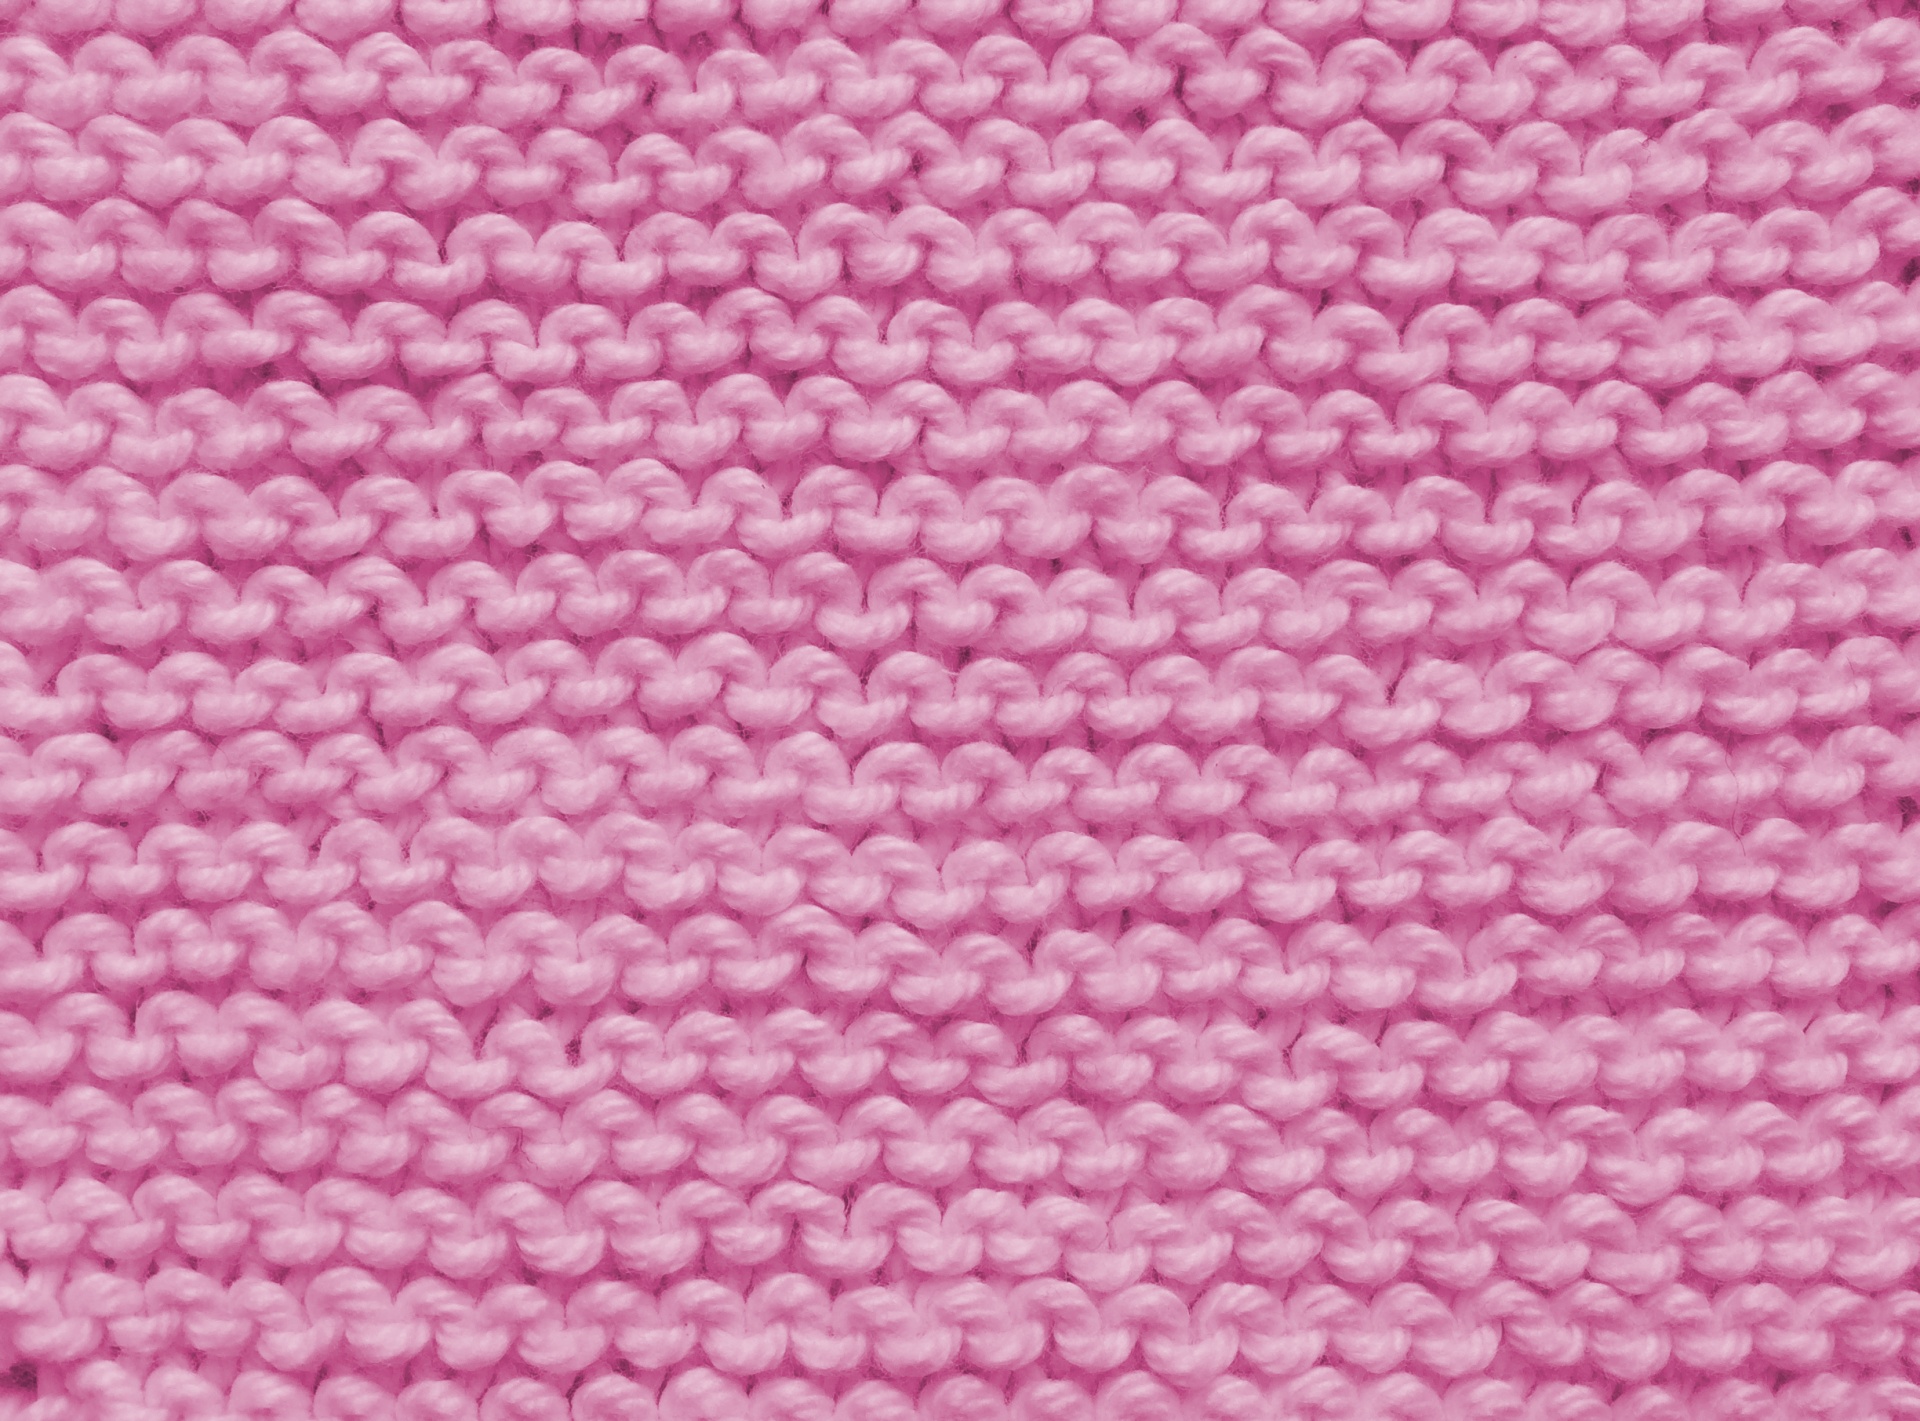 Knitting Texture Pink Background